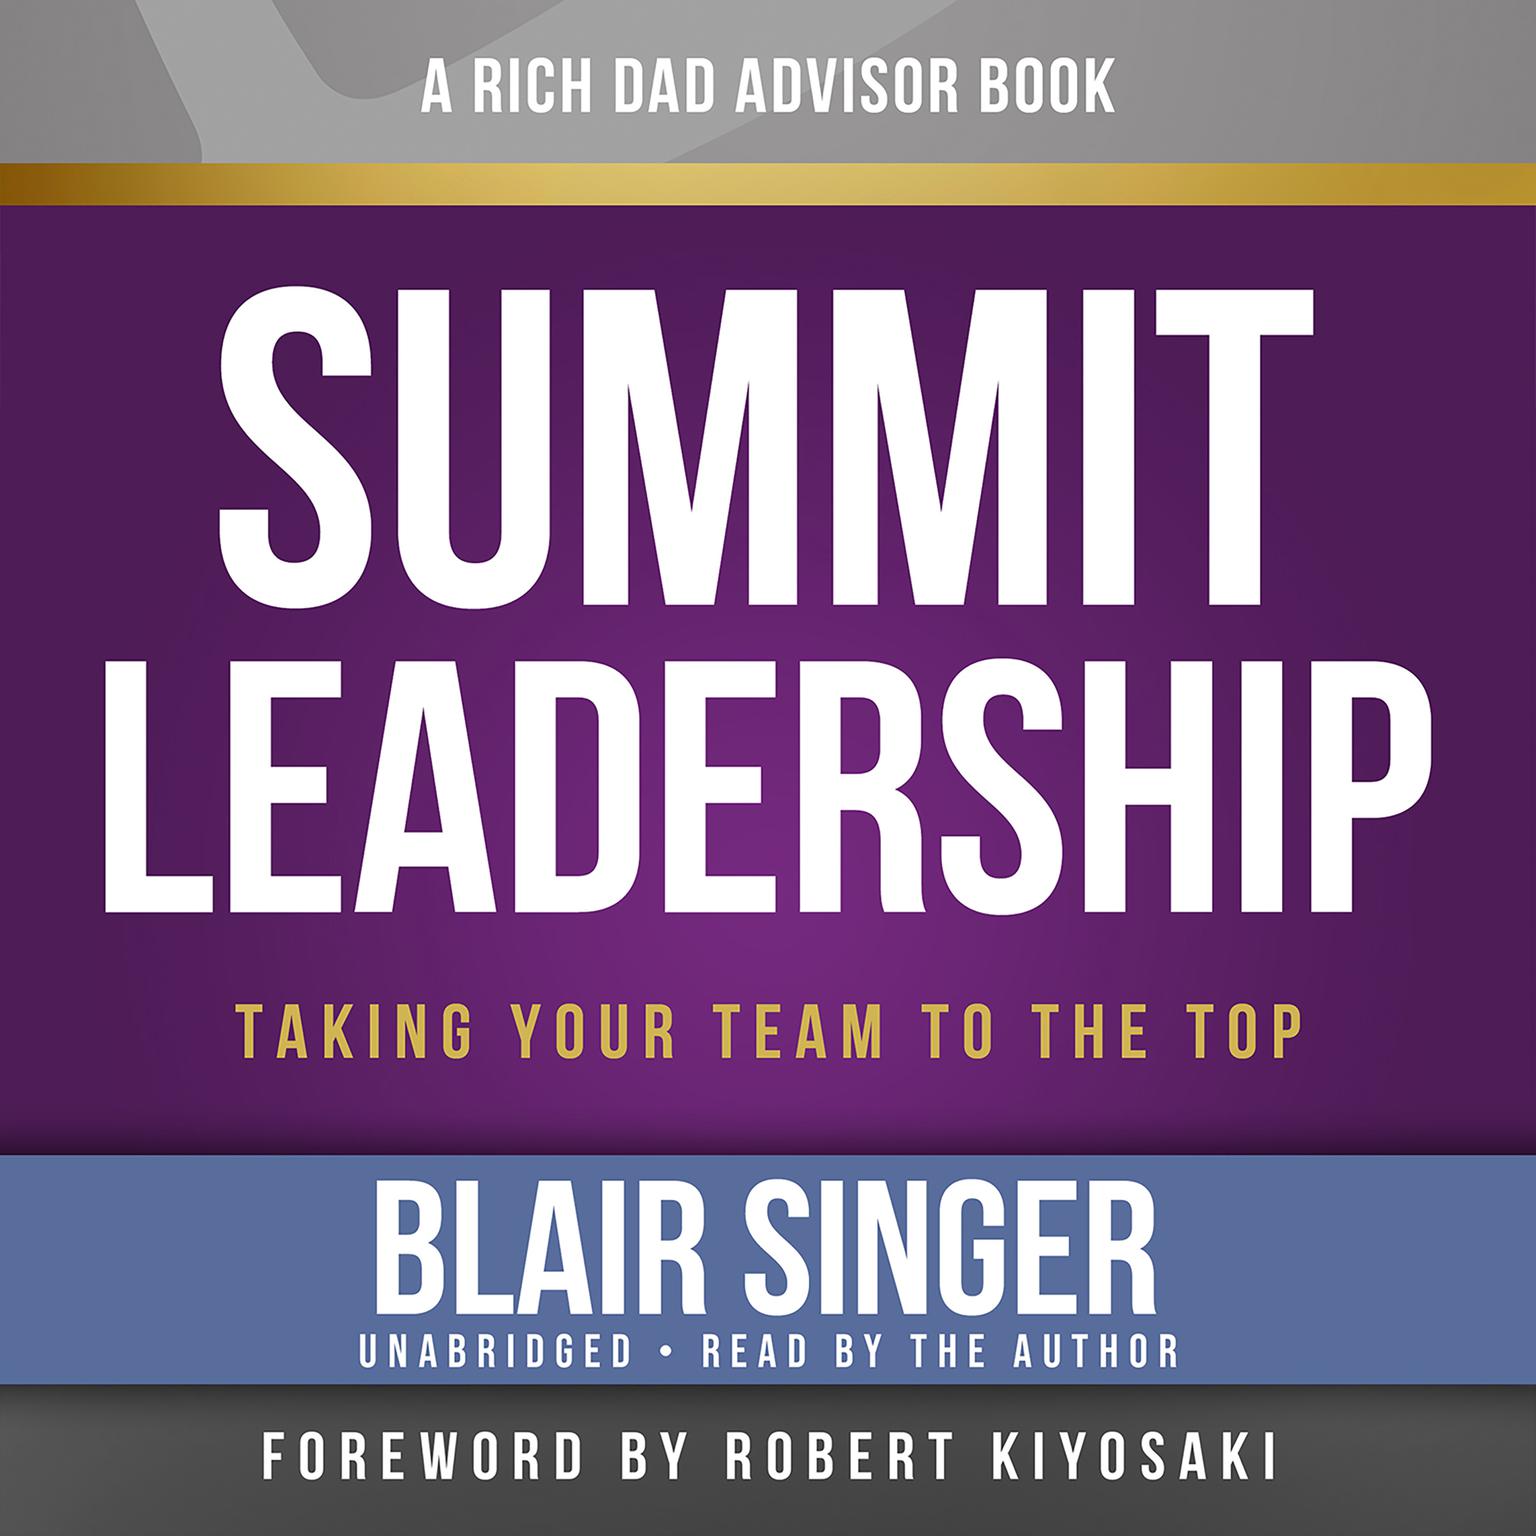 Summit Leadership: Taking Your Team to the Top Audiobook, by Blair Singer